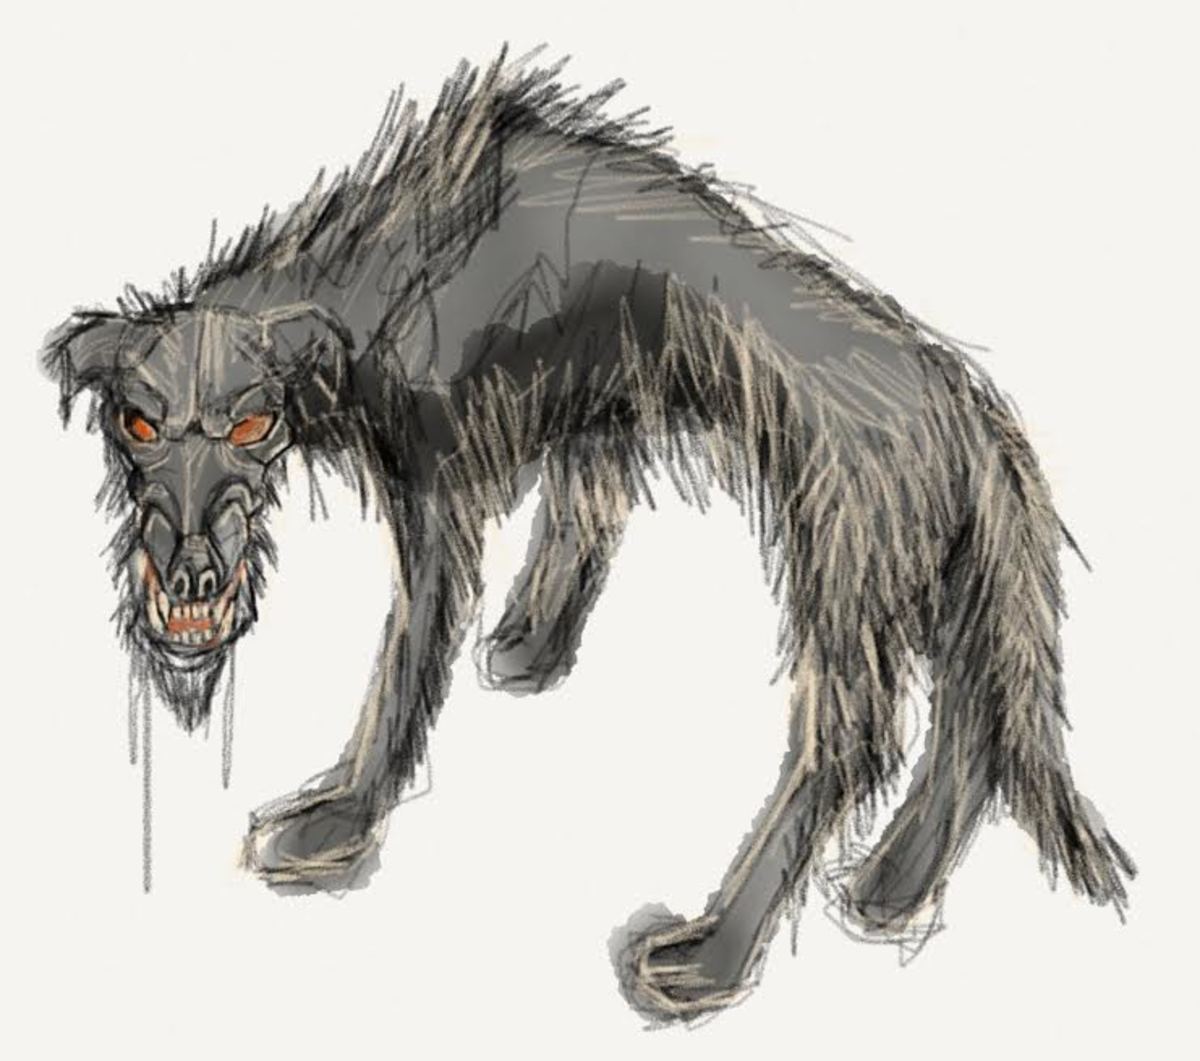 The Barghest is a bad omen that only comes out at night – one look might mean your impending death. It may also be a shapeshifter.